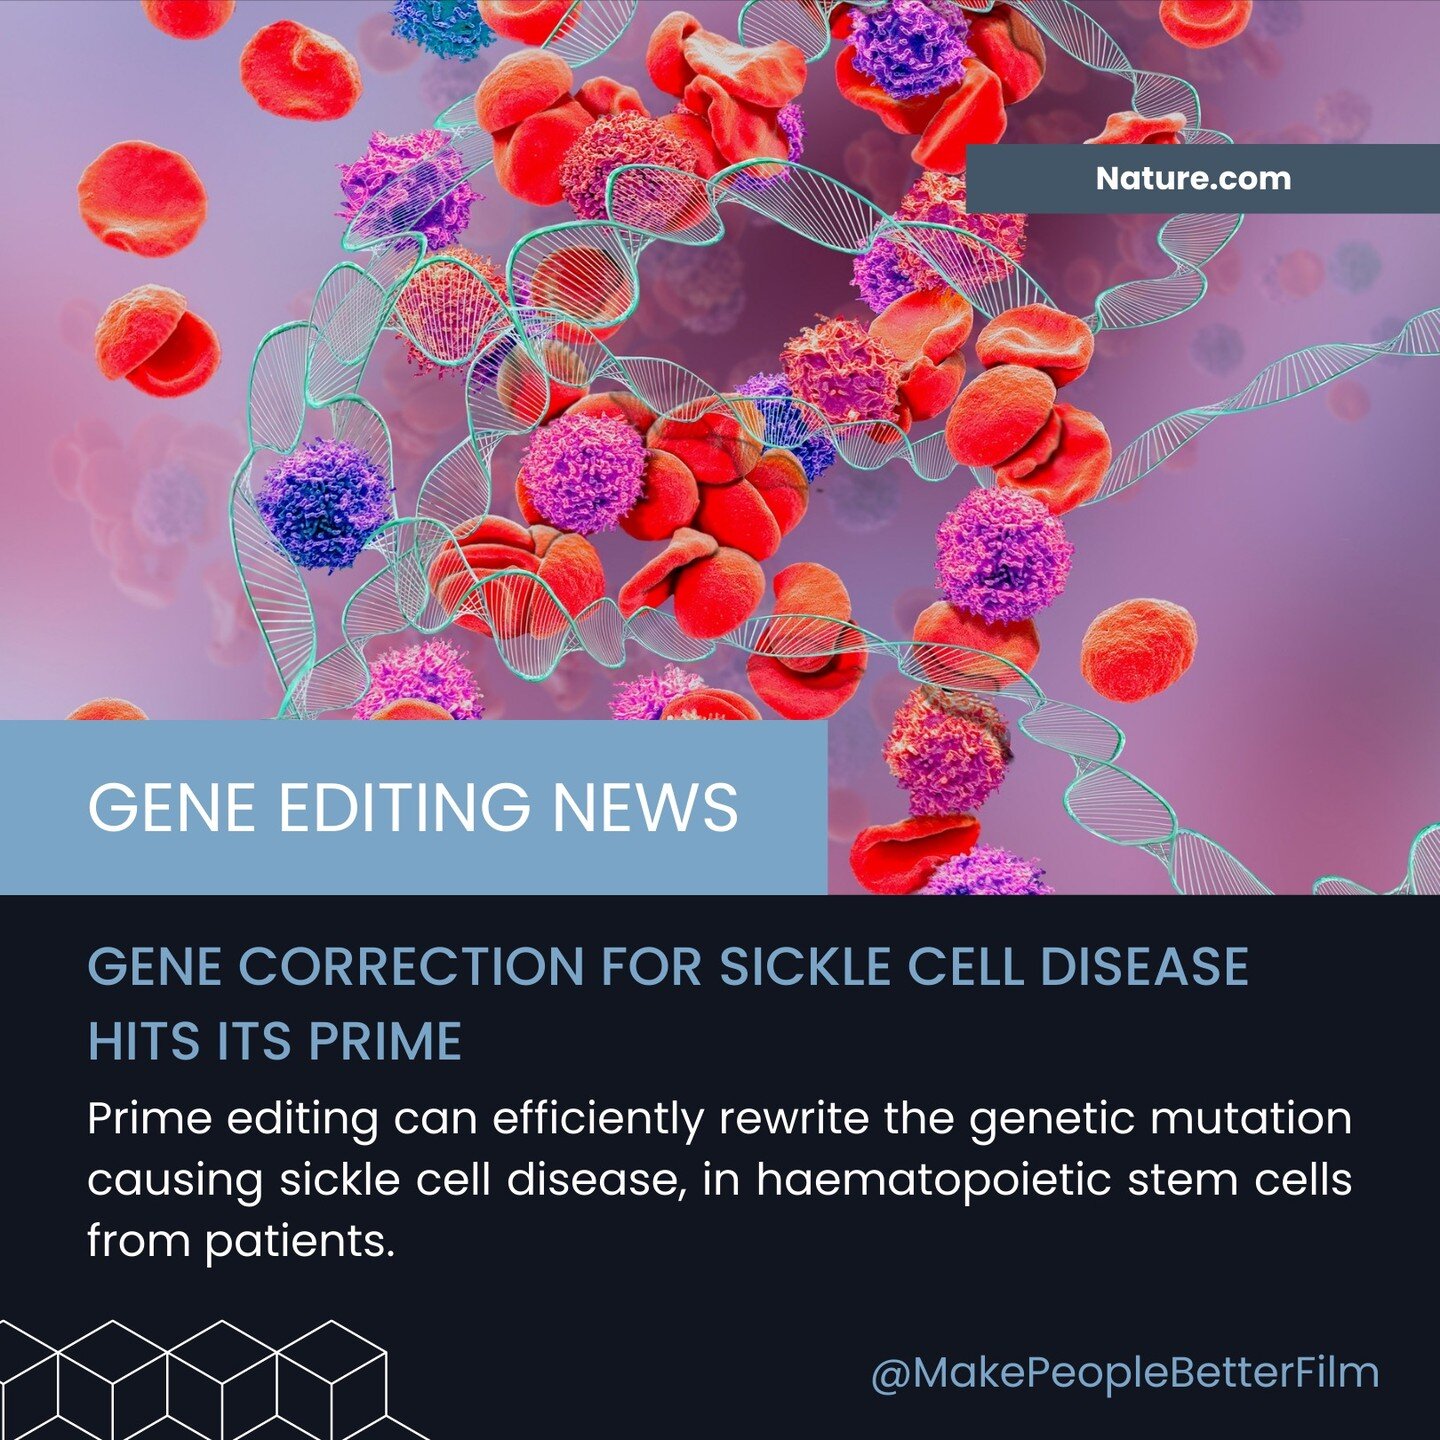 Prime editing efficiently corrects the genetic mutation causing sickle cell disease in patients' hematopoietic stem cells.

Therapeutic genome editing of haematopoietic stem cells (HSCs) may permanently remedy sickle cell disease (SCD) and other seve